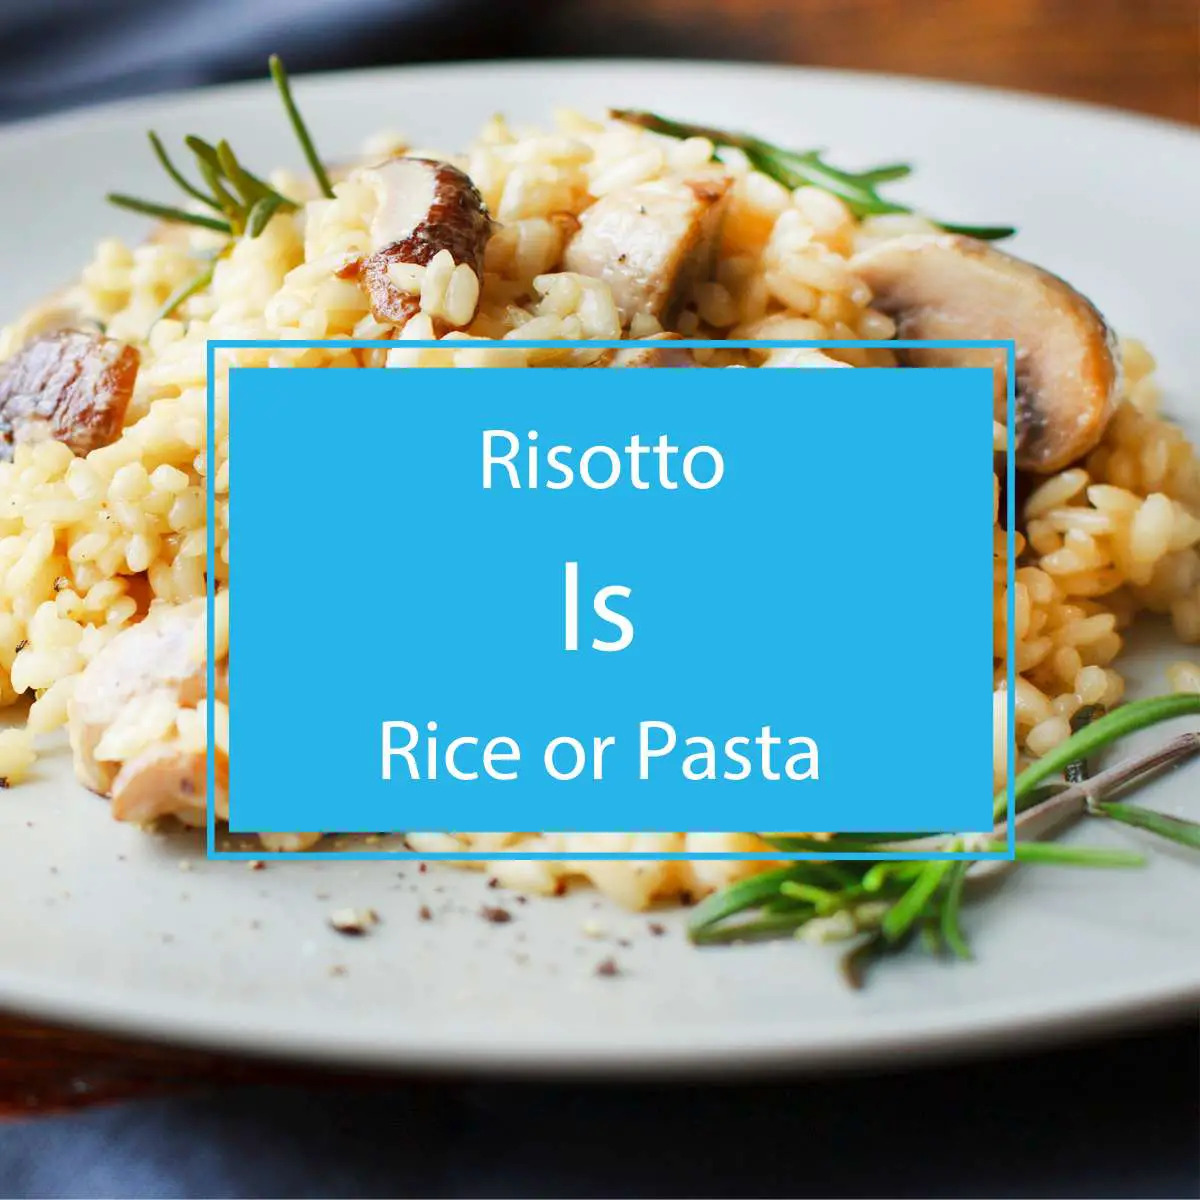 Risotto Is Rice or Pasta